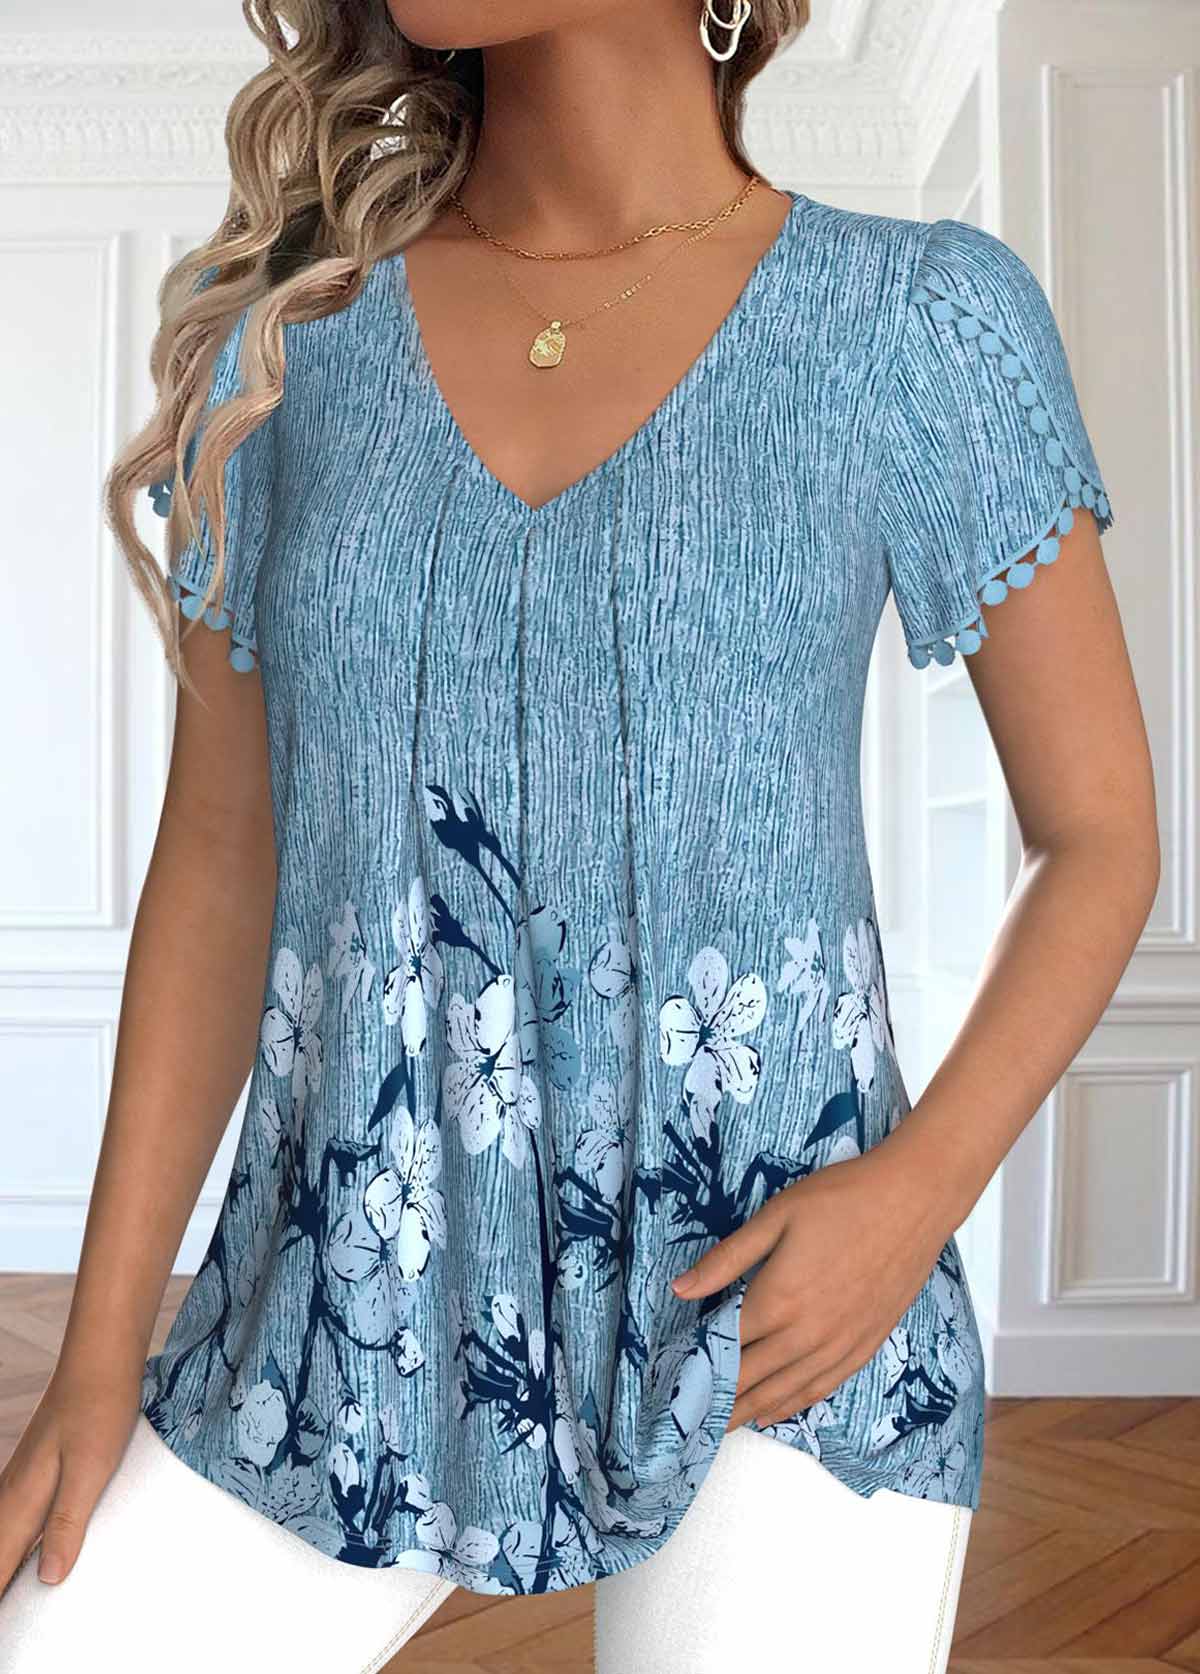 Dusty Blue Embroidery Floral Print Short Sleeve T Shirt